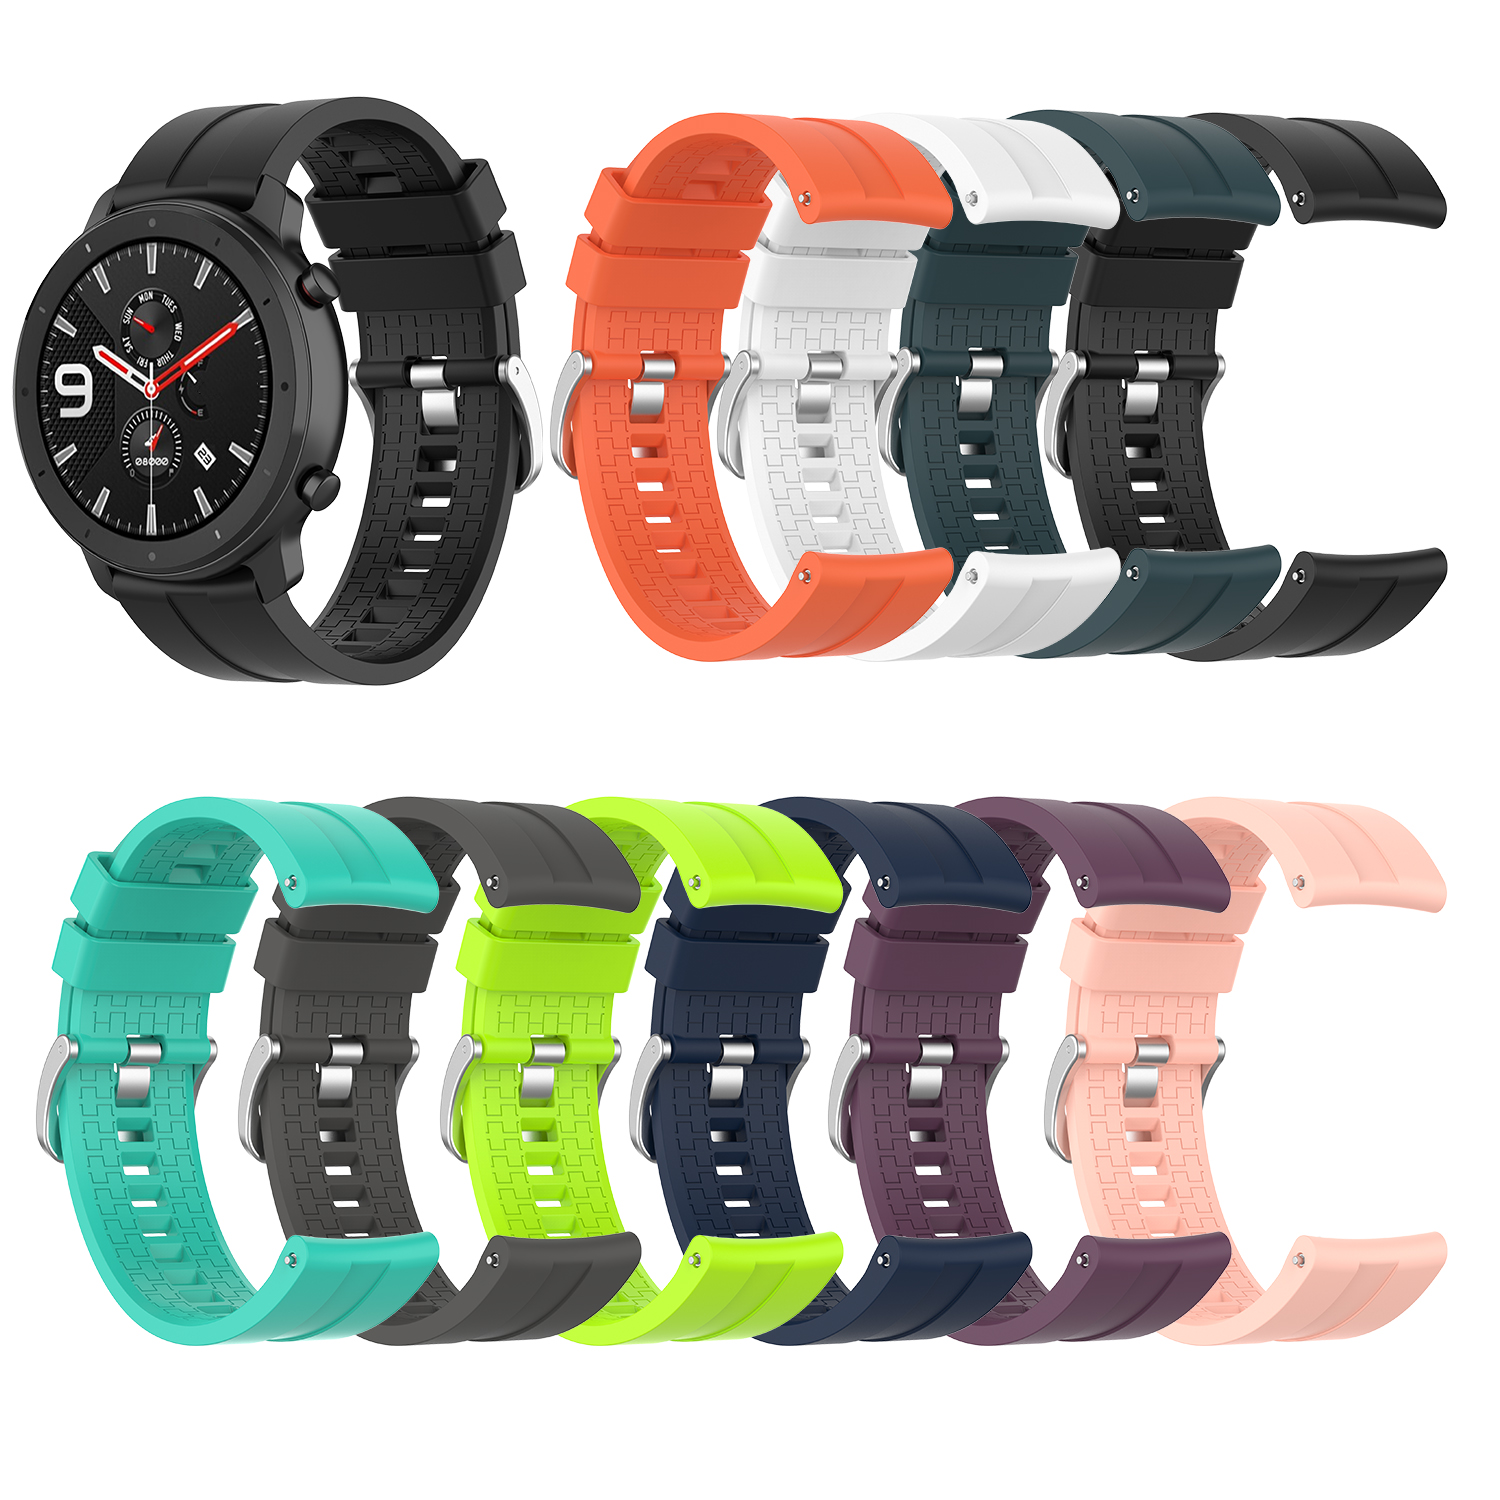 

Bakeey Silicone Watch Band Replacement Watch Strap for Amazfit GTR 47MM Smart Watch